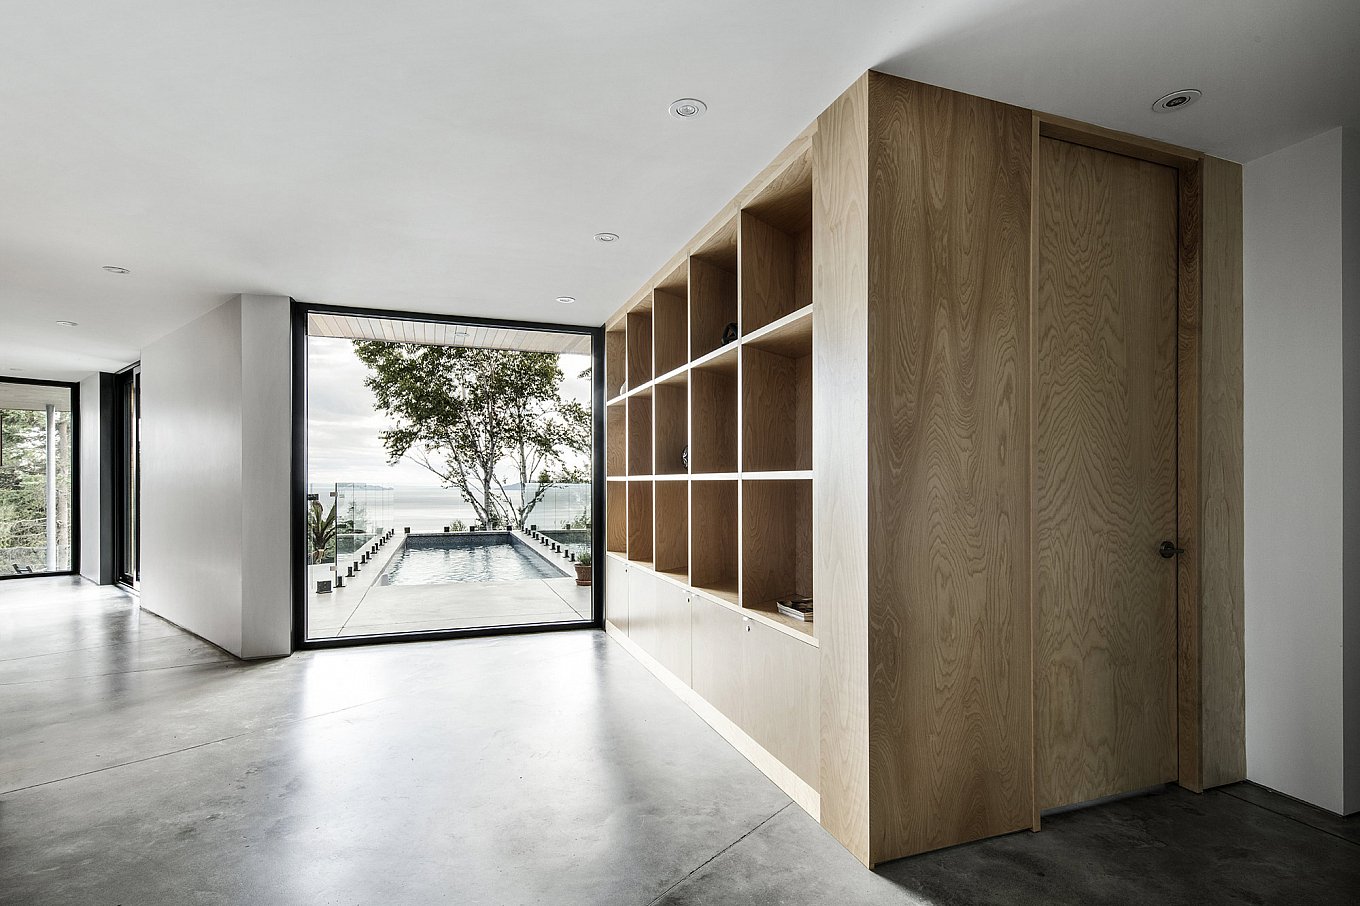 altair-house-bourgeois-lechasseur-architects-19